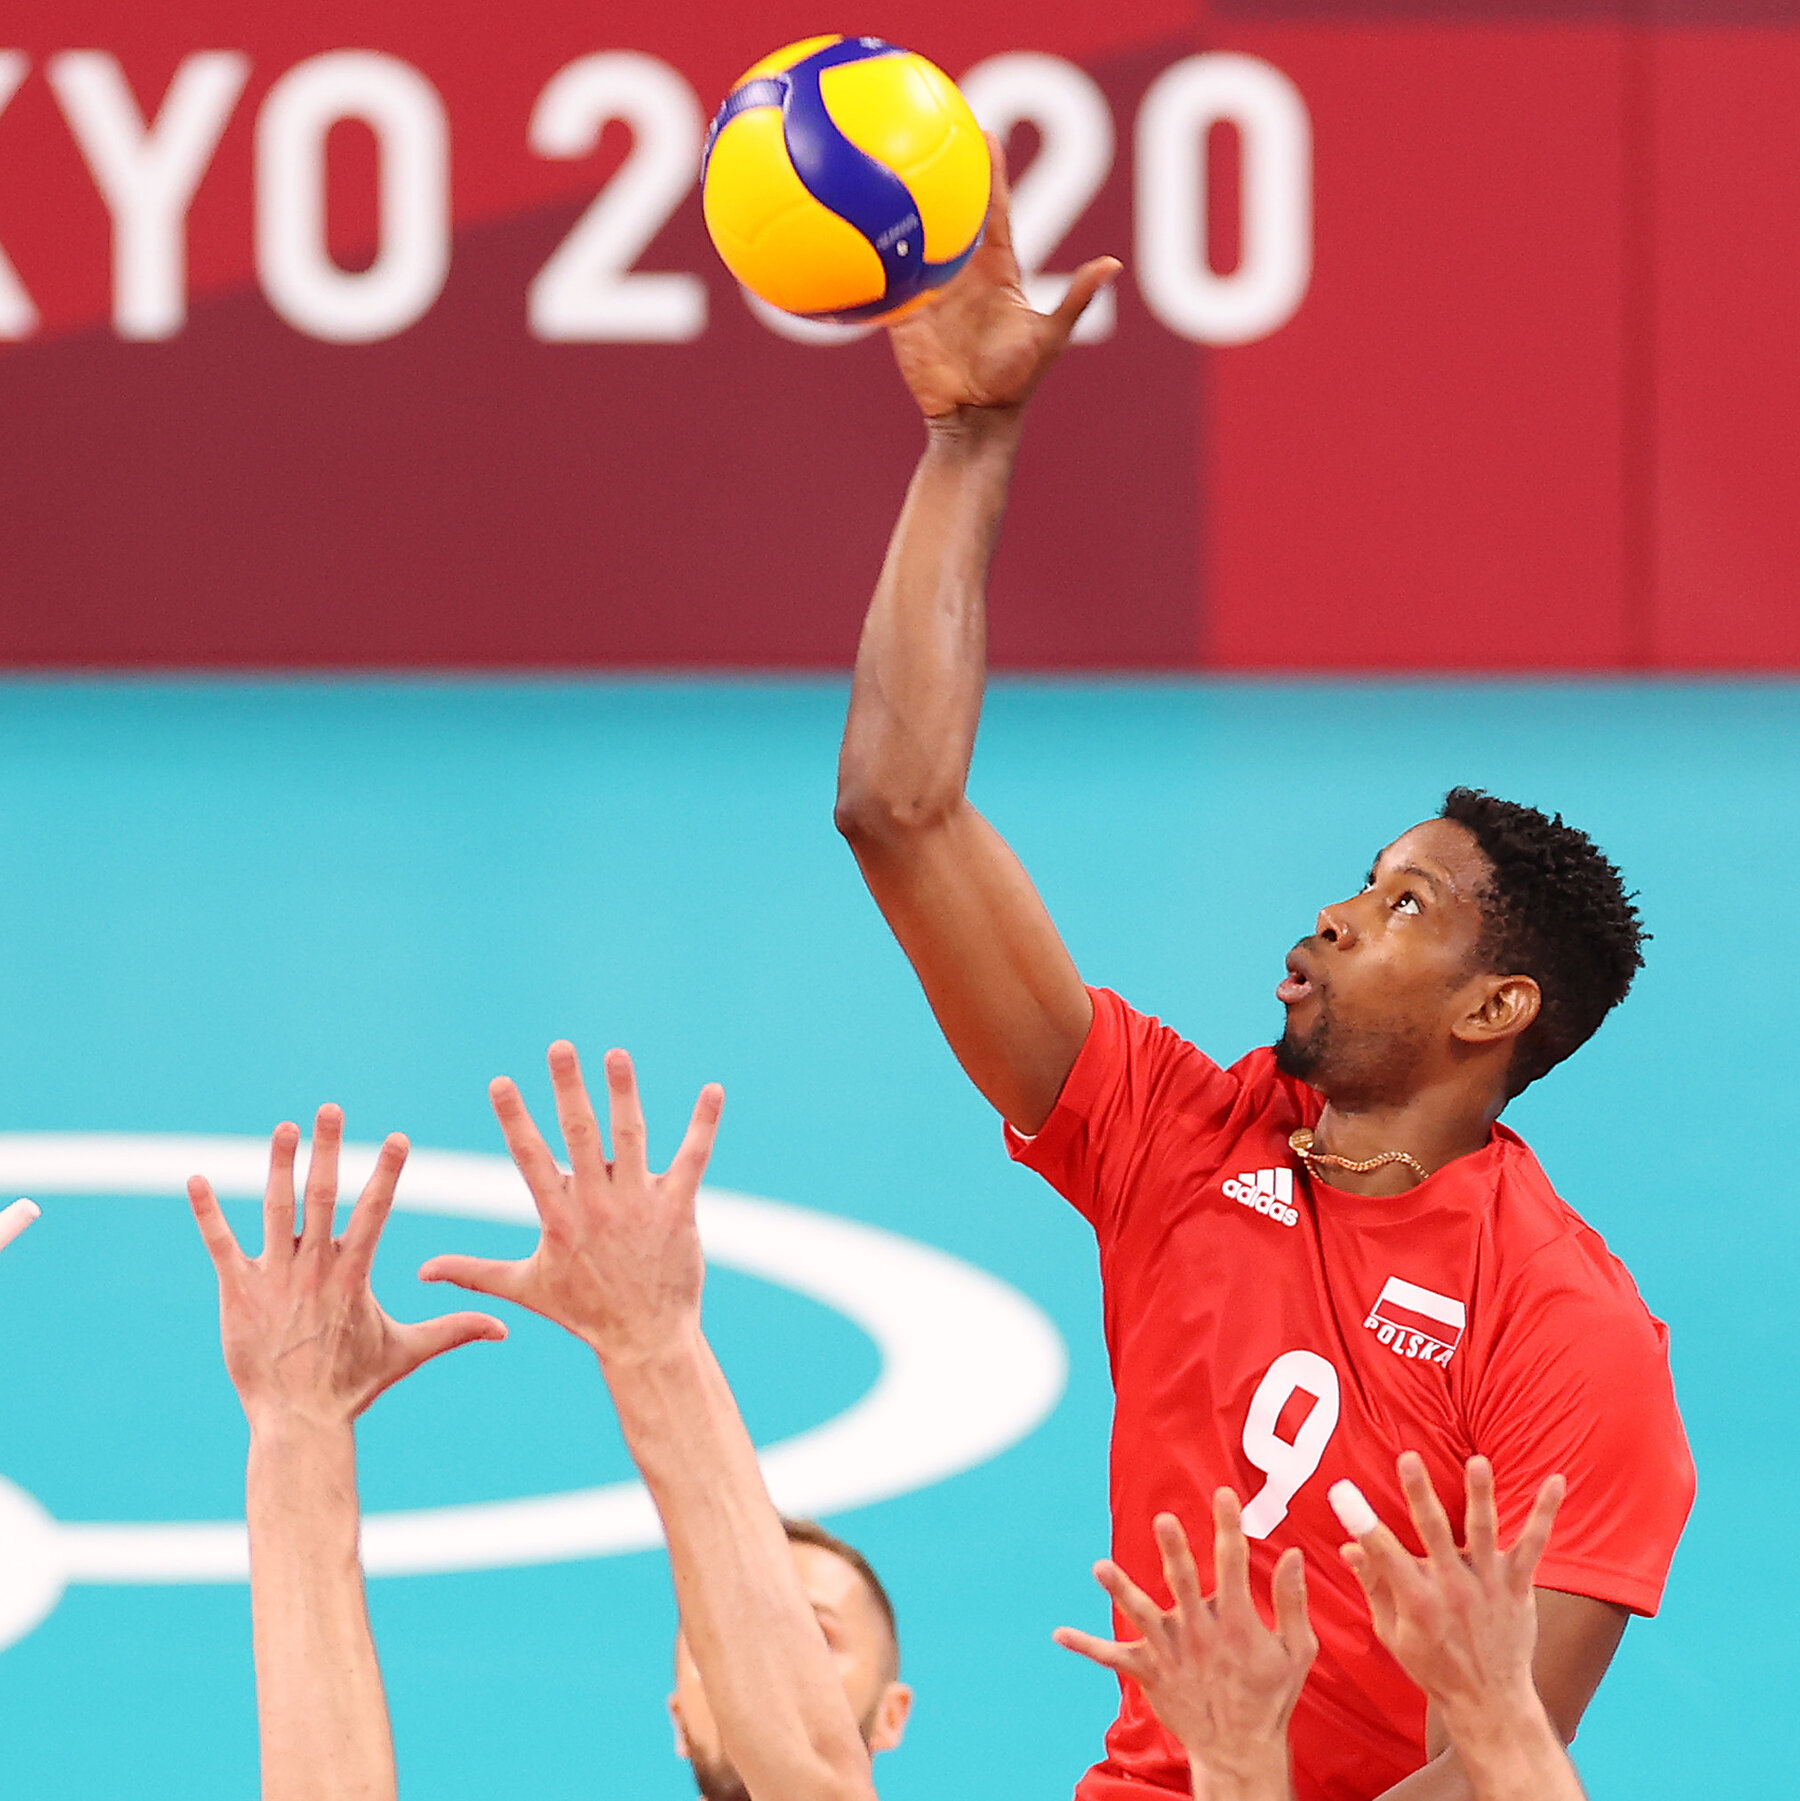 Wilfredo Leon - The Volleyball Superstar Making History